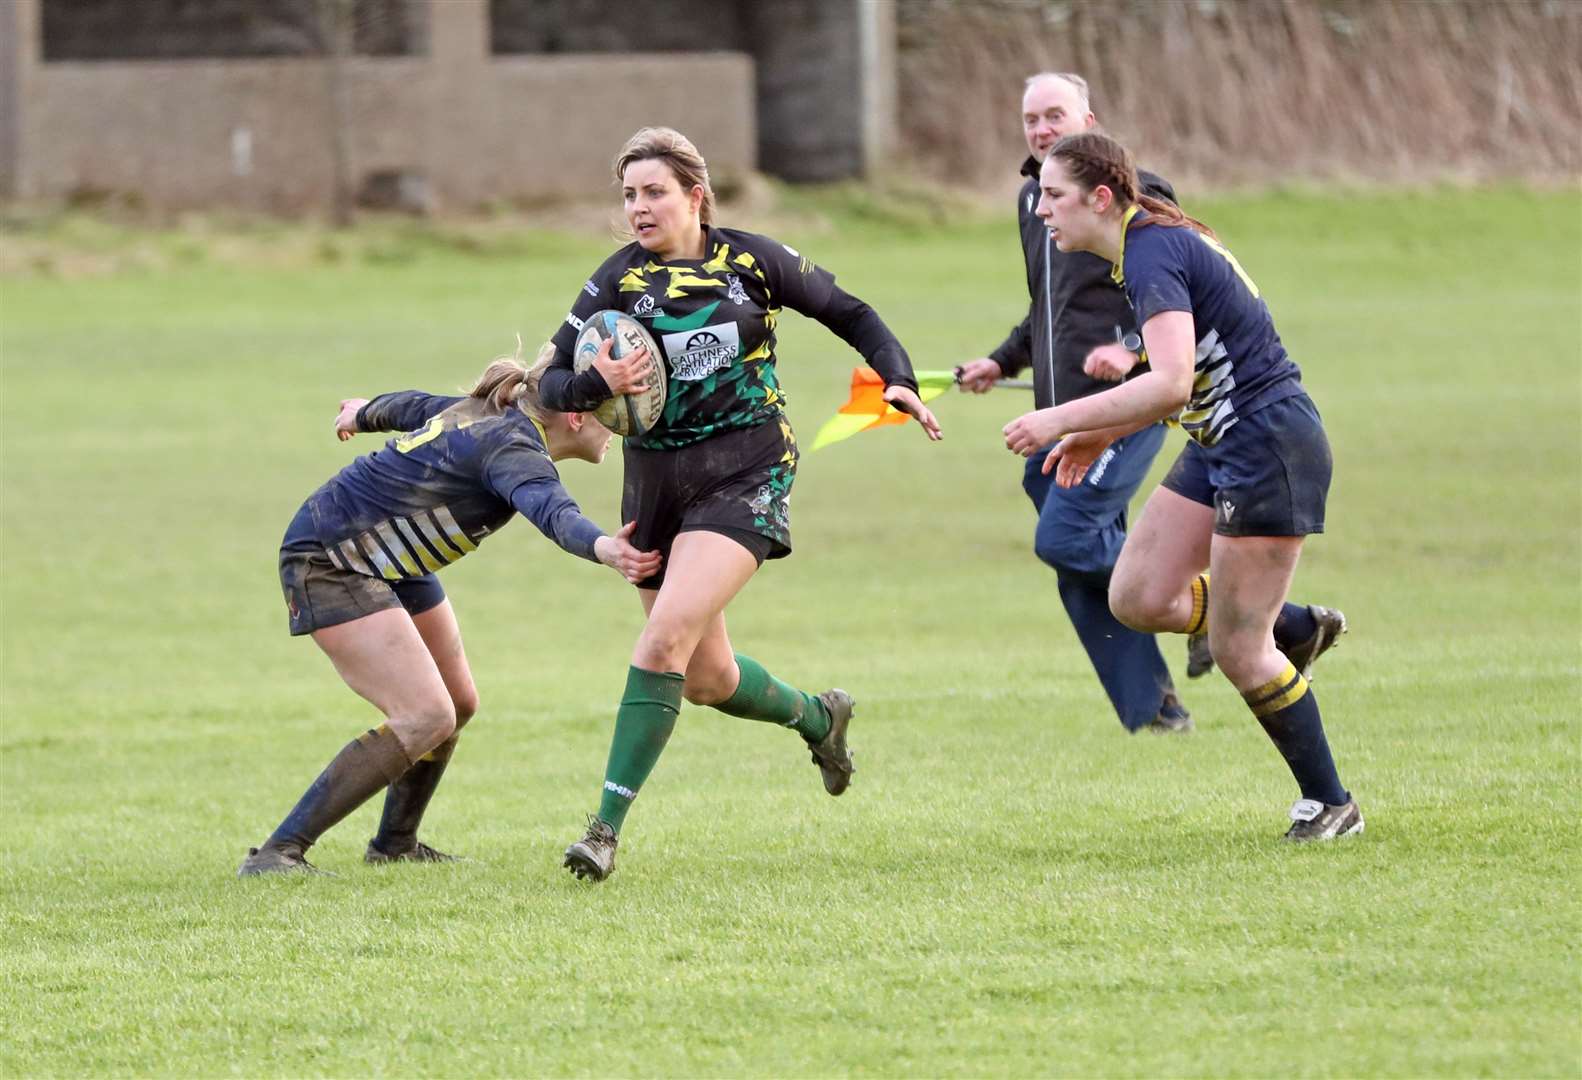 Lauren Gunn escapes from a tackle before going on to score a try during the Krakens' 116-0 thrashing of Dundee Valkyries 2nd XV. Picture: James Gunn